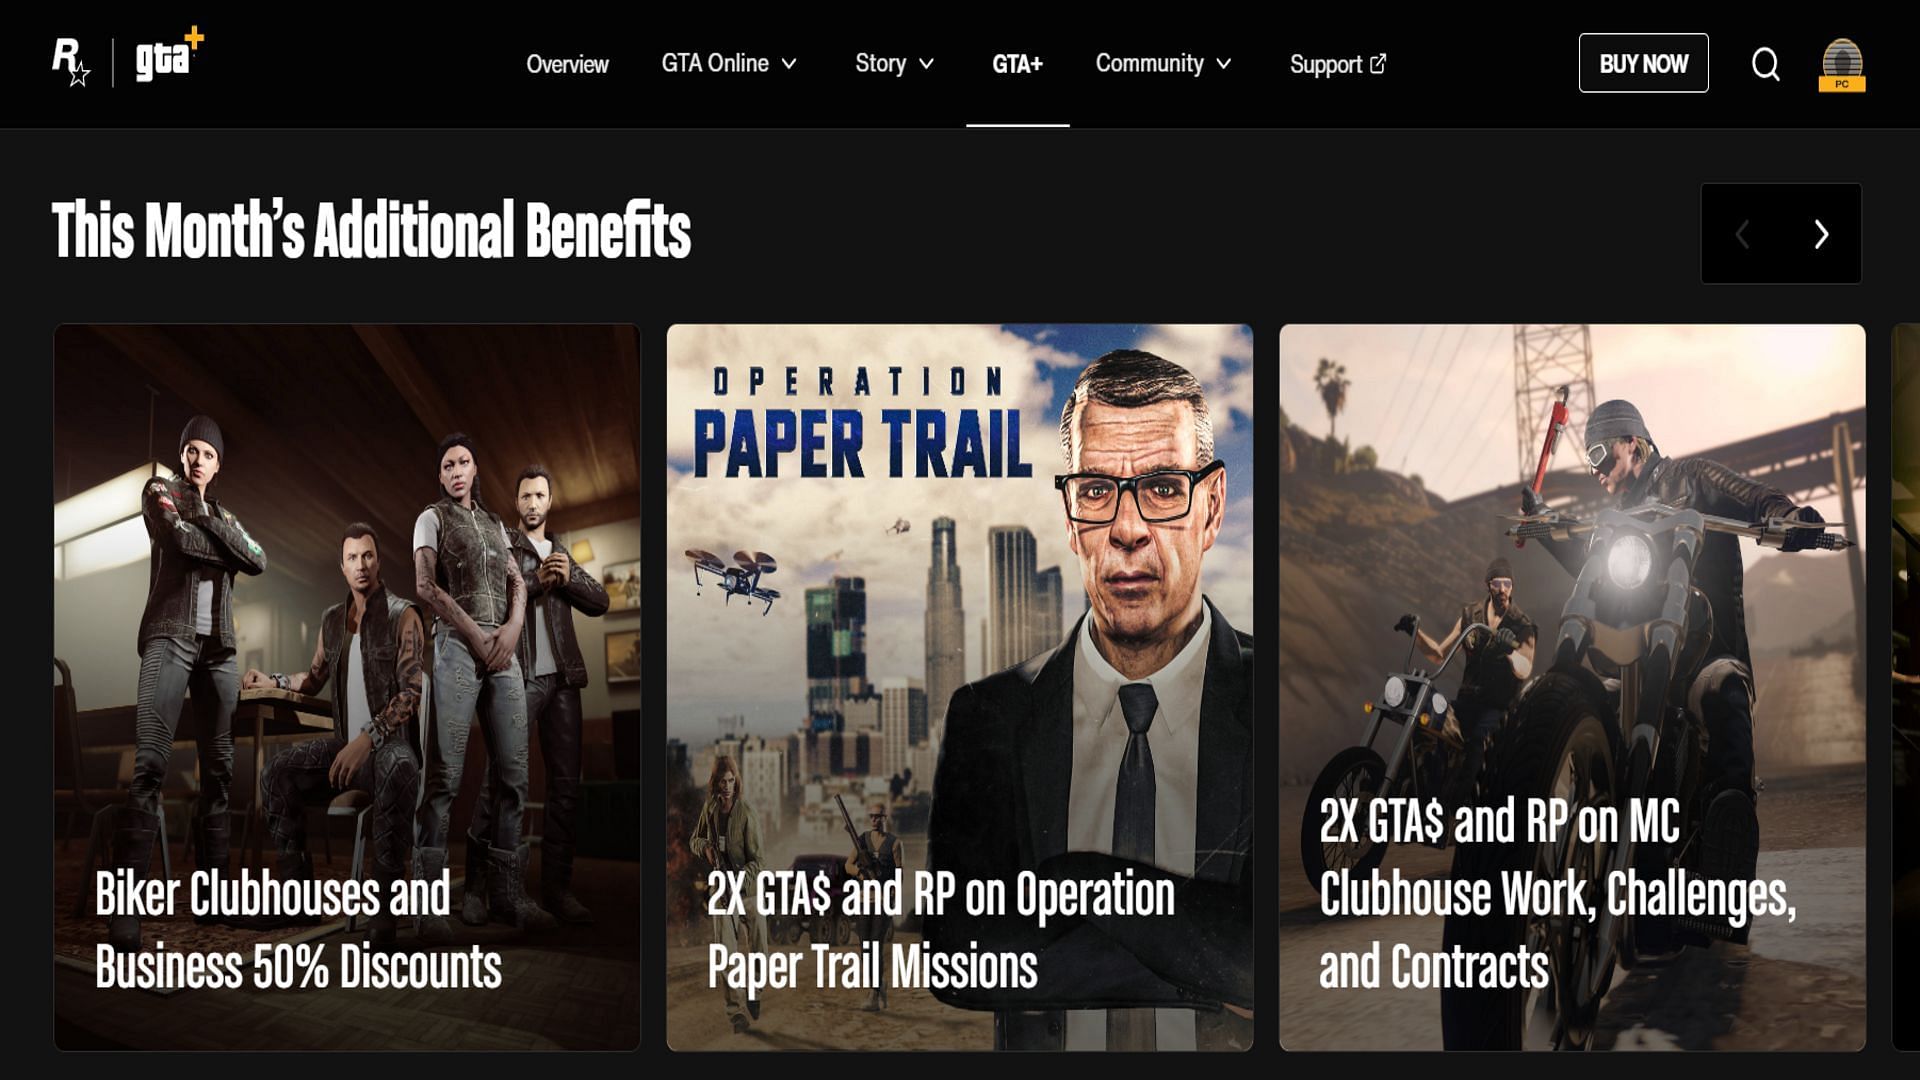 The recent month benefits of buying the subscription (Image via Rockstar Games)